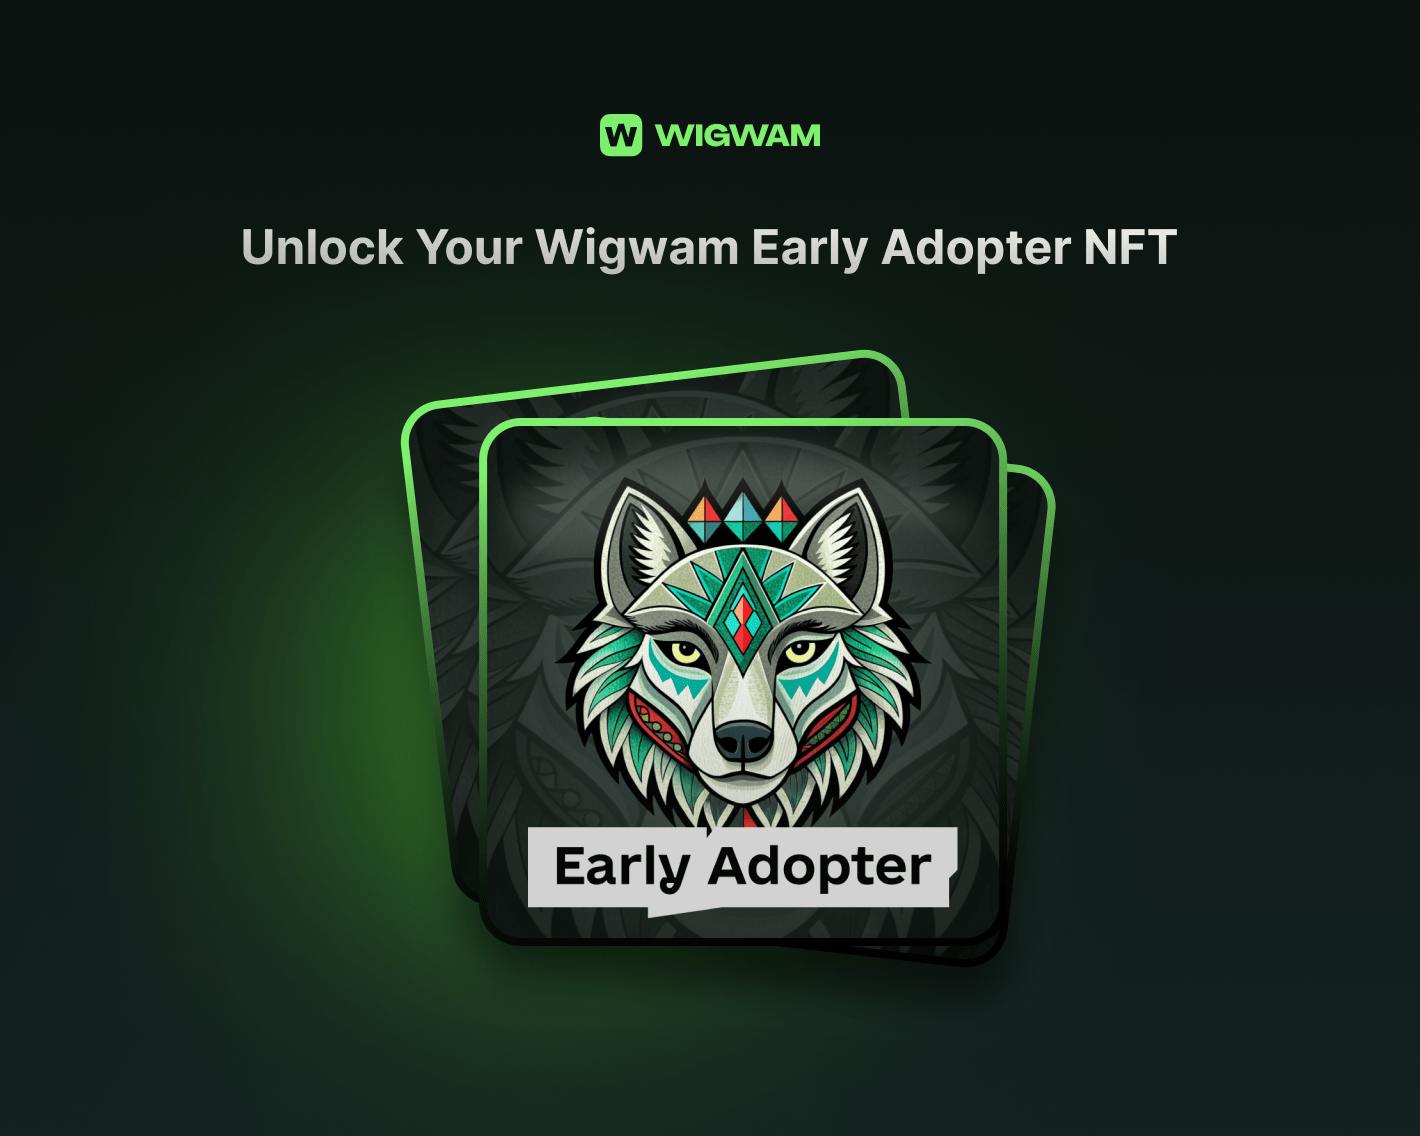 Wigwam Launches Exclusive Early Adopter NFT Campaign